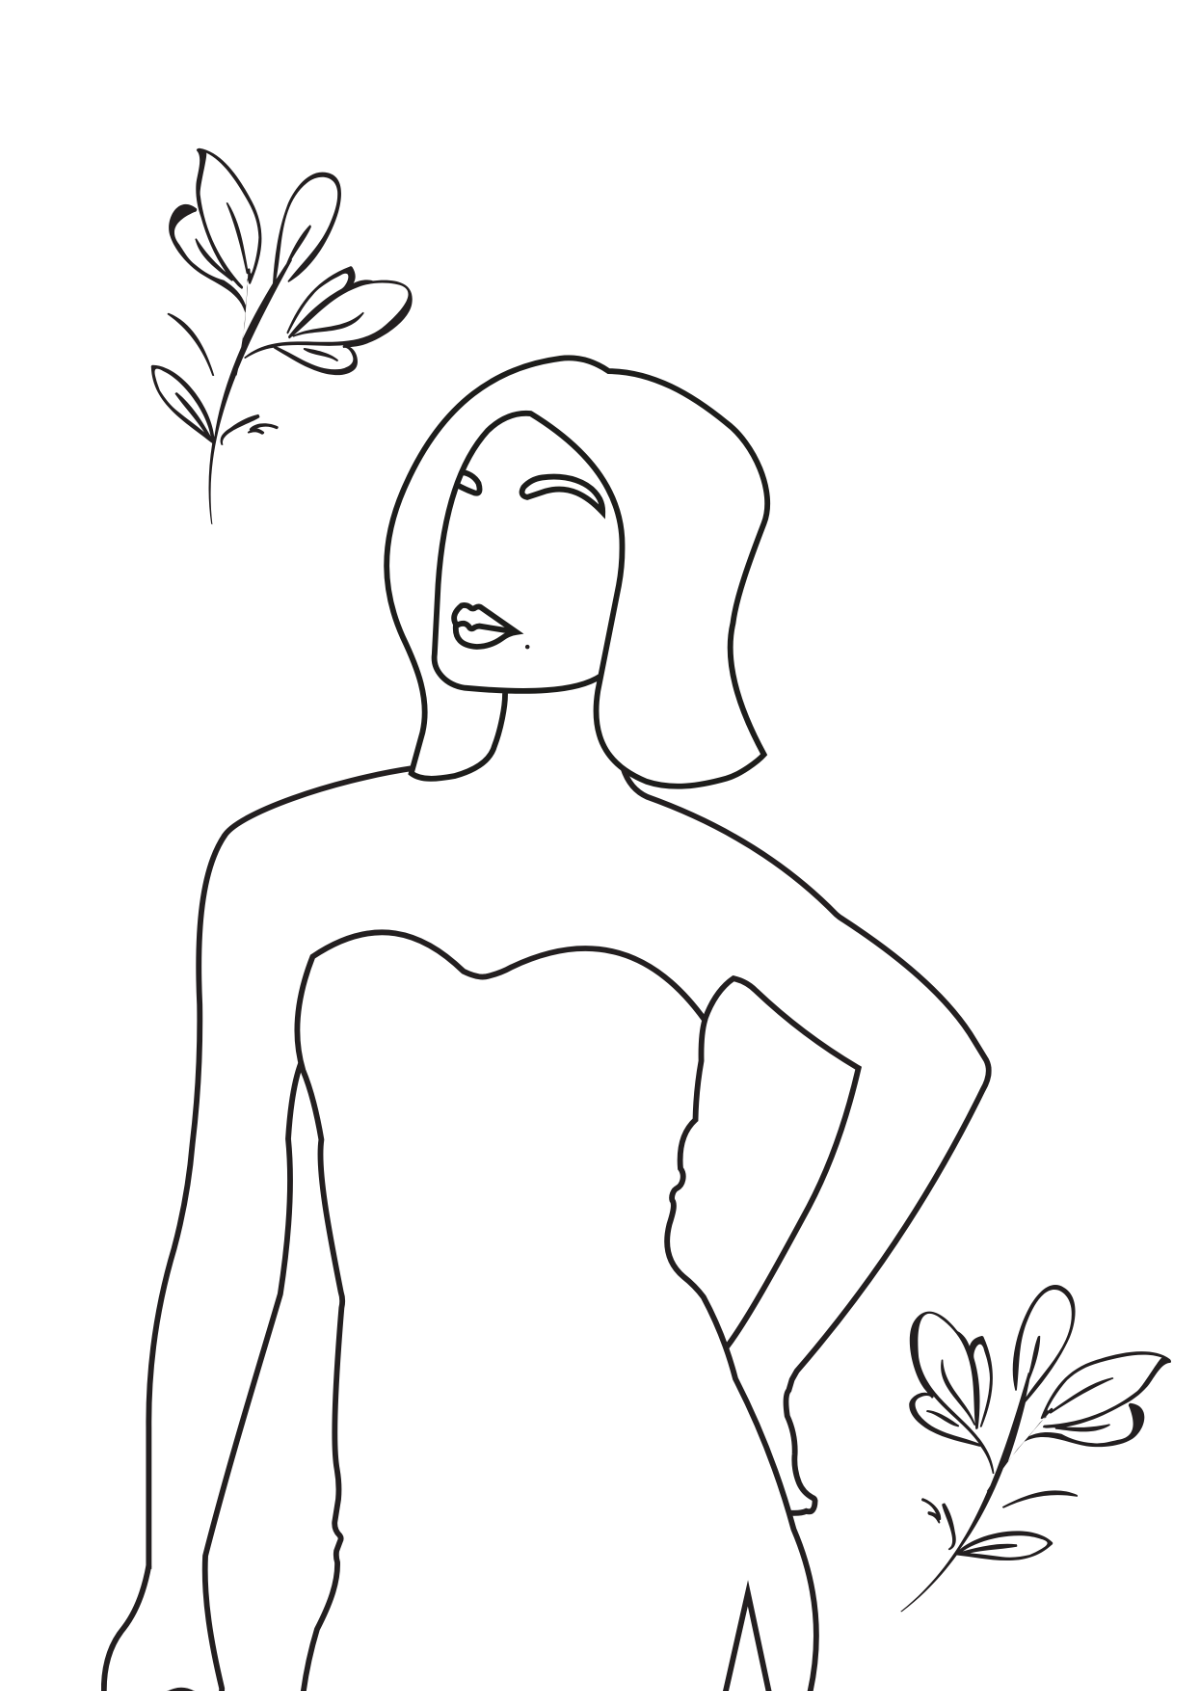 Happy Women's Day Greeting Card Design. Hand Drawn Sketch Illustration.  Royalty Free SVG, Cliparts, Vectors, and Stock Illustration. Image 72173697.